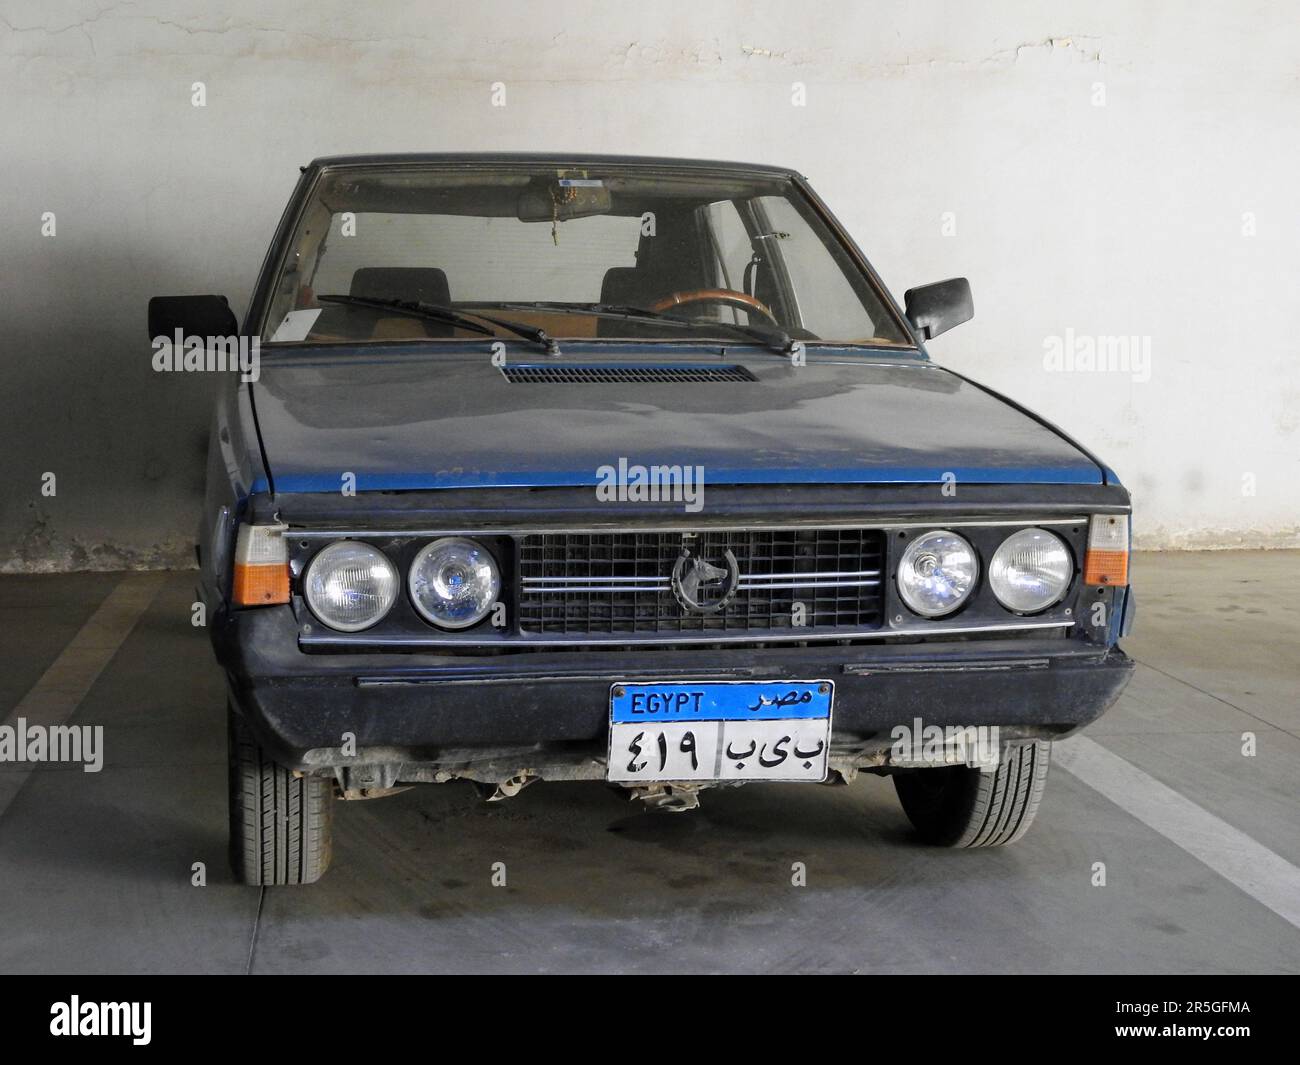 Cairo, Egypt, May 27 2023: an old vintage retro FIAT Polonez car in a garage with new Egyptian car plate numbers, selective focus of old vintage retro Stock Photo